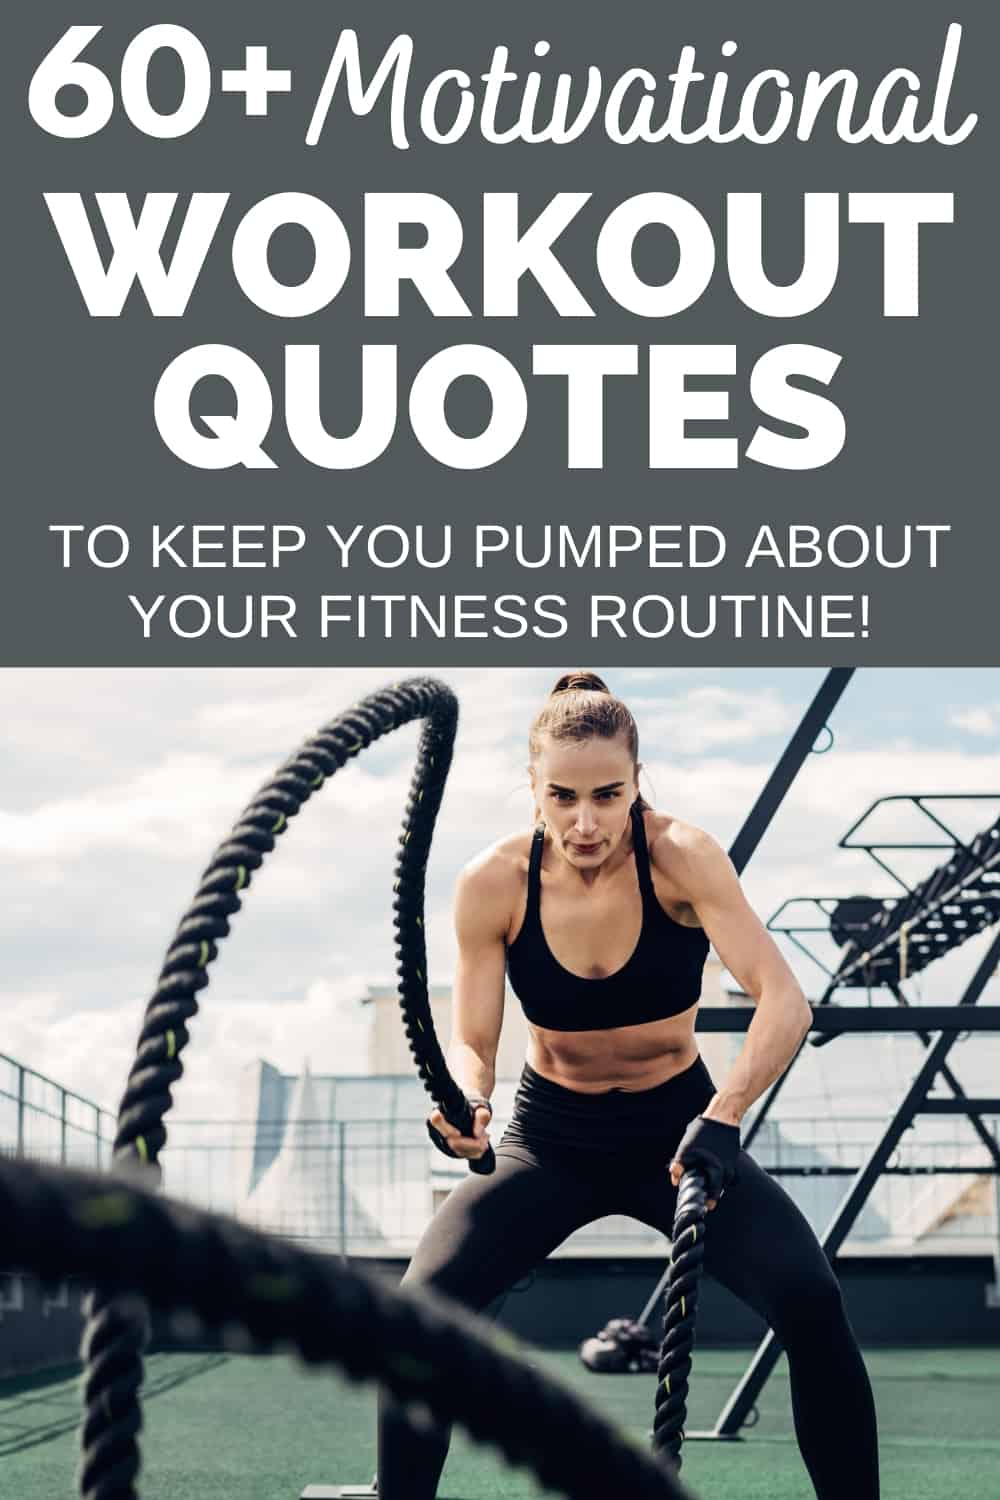 60-motivational-workout-quotes-to-help-you-stick-to-a-fitness-routine